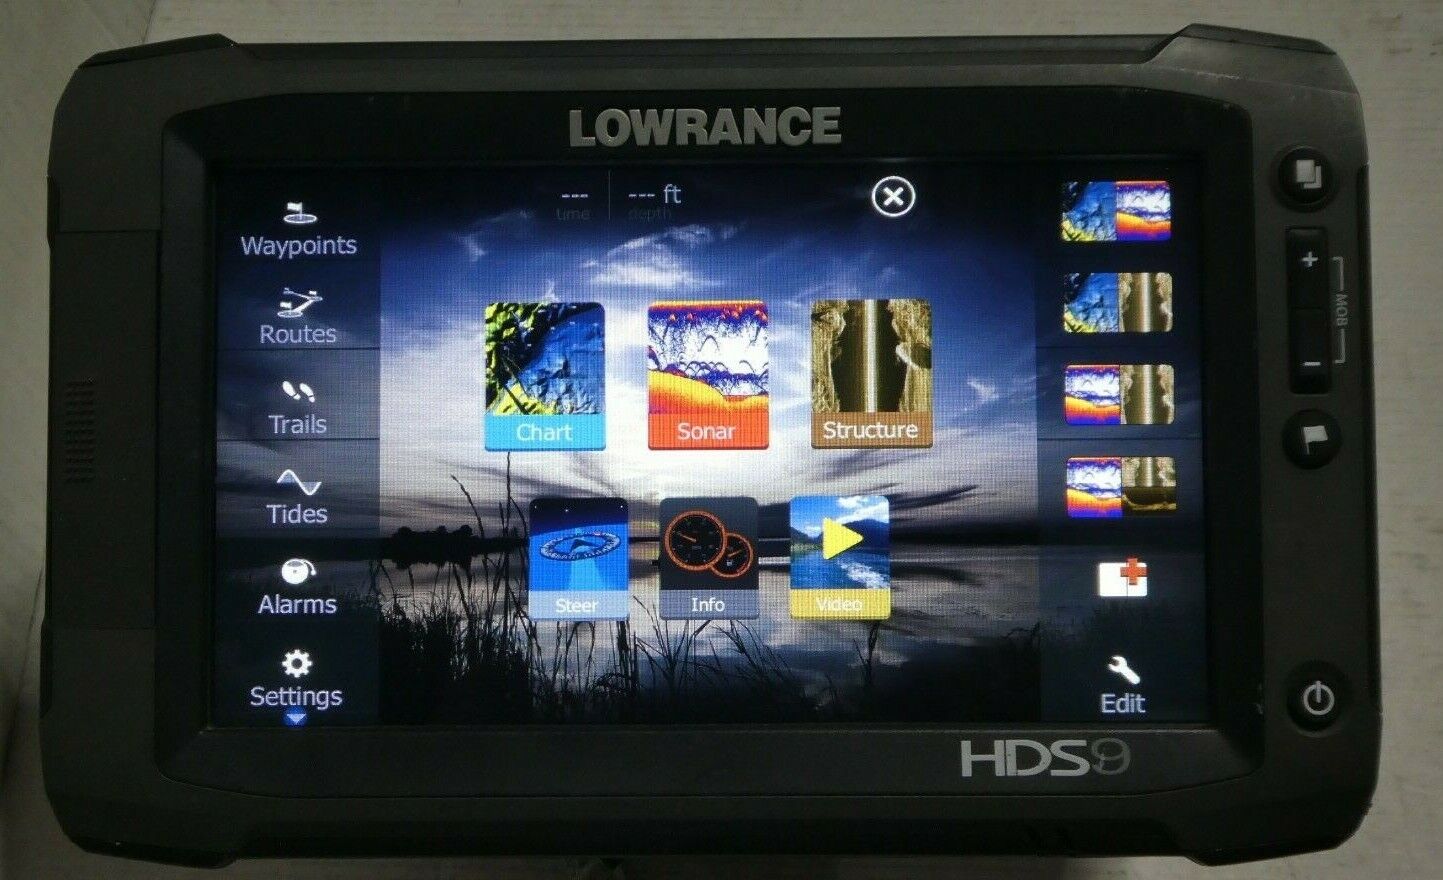 Lowrance HDS 9 Touch Insight GEN 2 GPS Fishfinder LOWRANCE